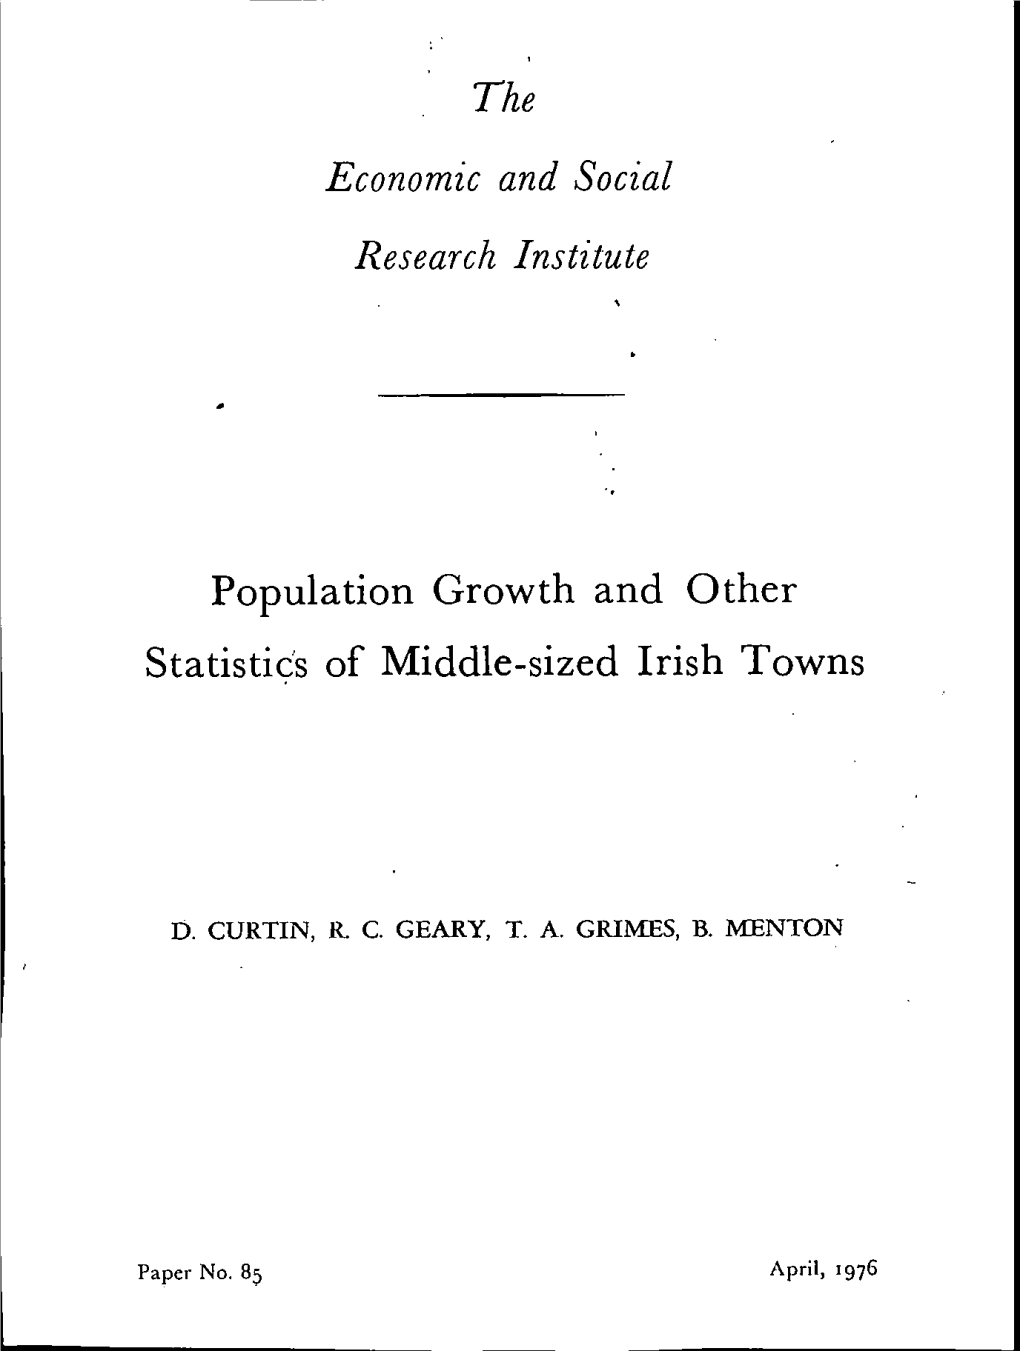 Economic and Social Statistic~S of Middle-Sized Irish Towns